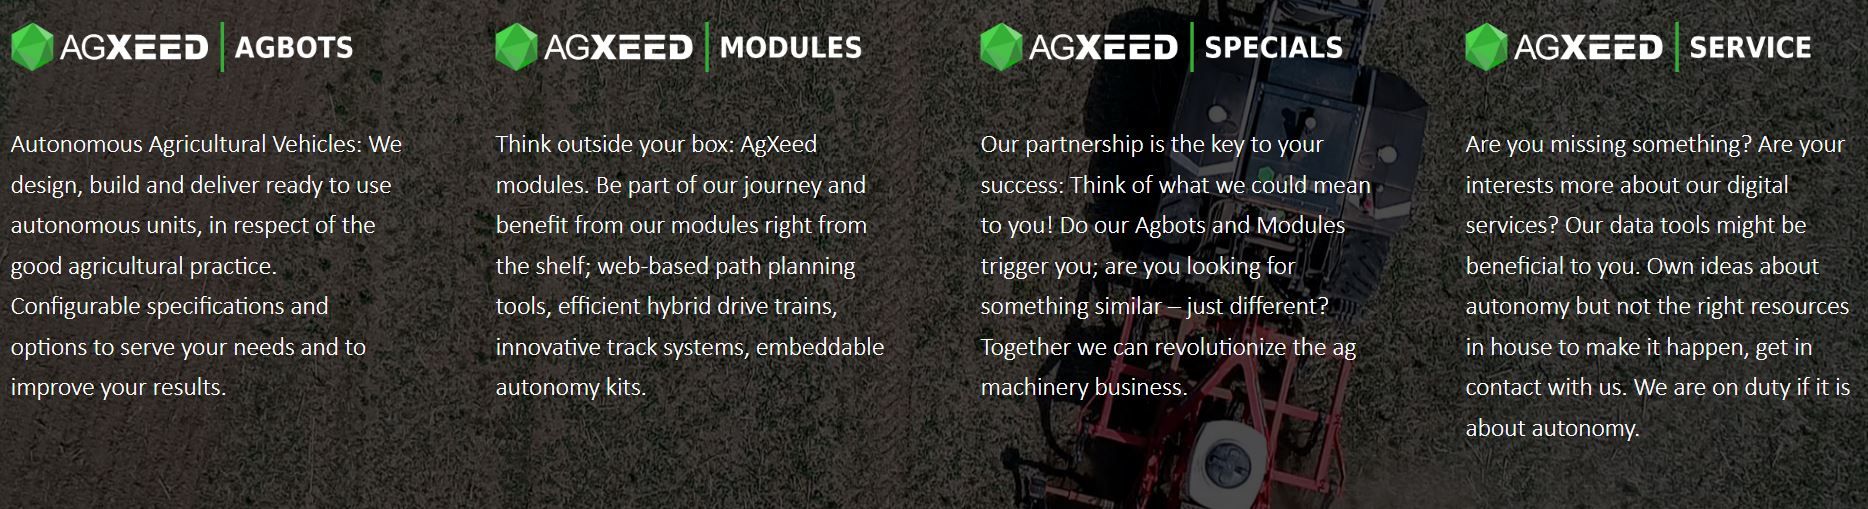 Agxeed services for demo page